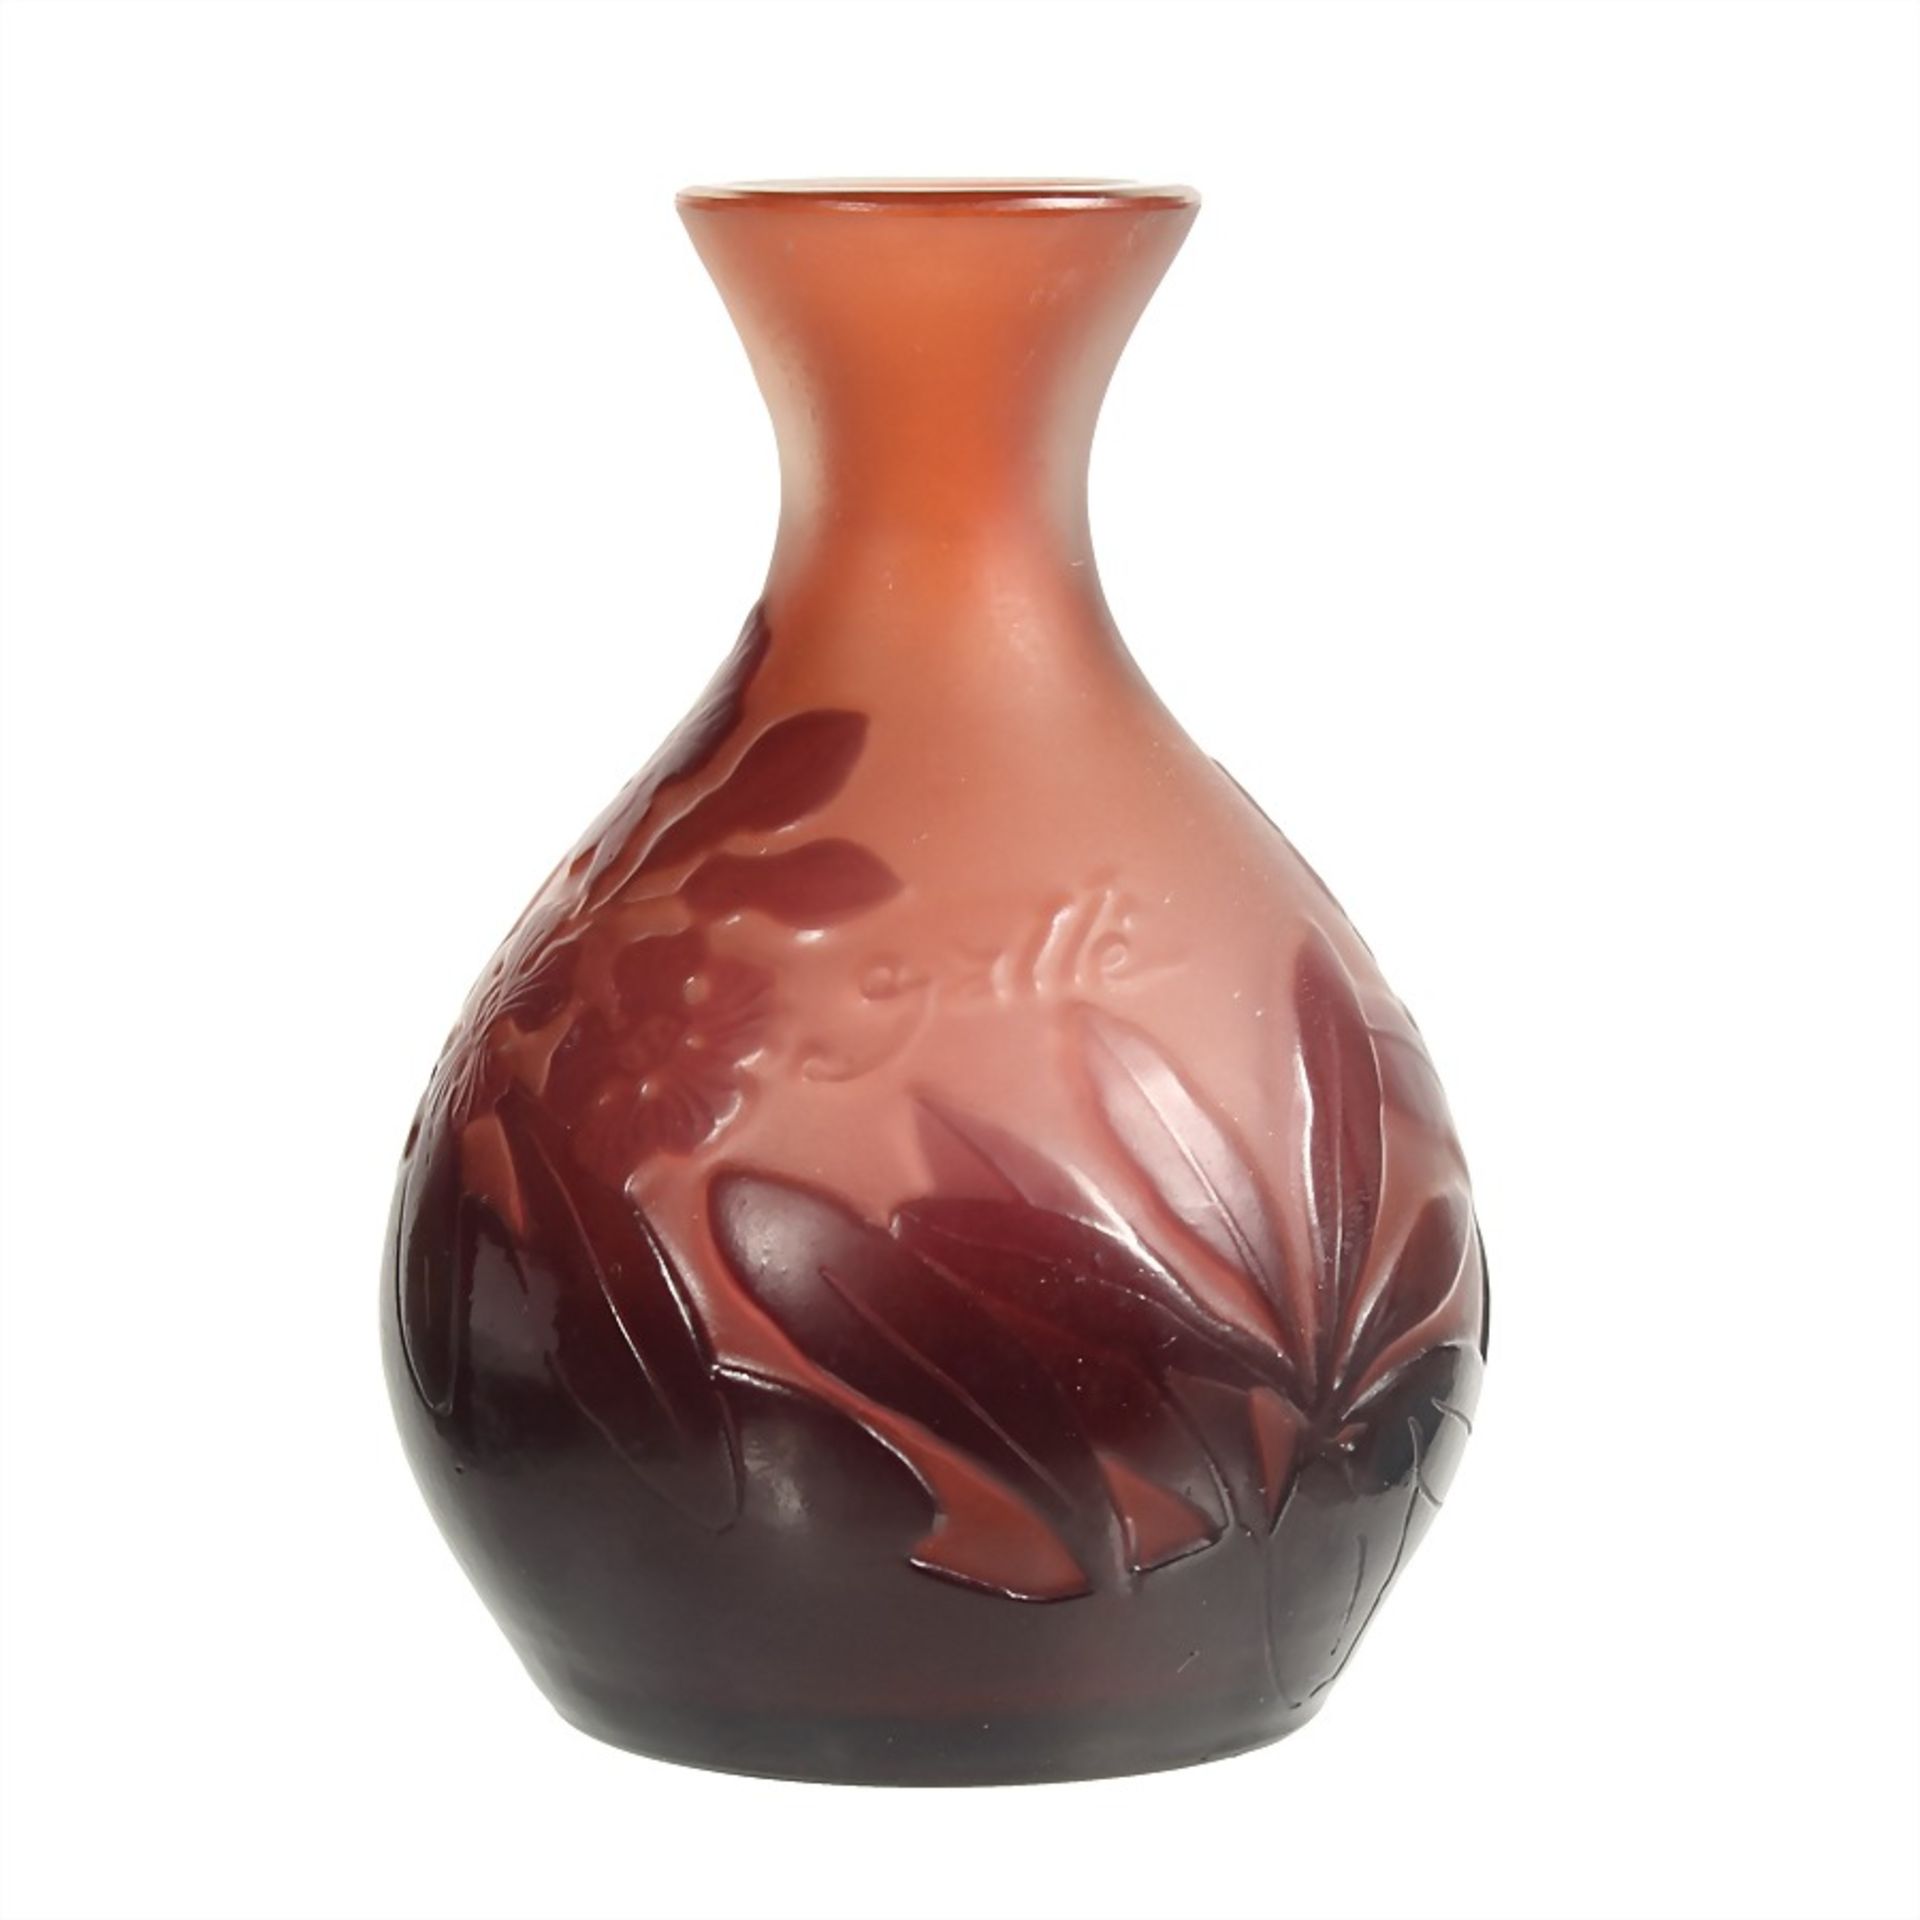 small GALLÈ vase around 1910, signed Gallé, partial etched and polished, height = 8.7 cm, diameter =